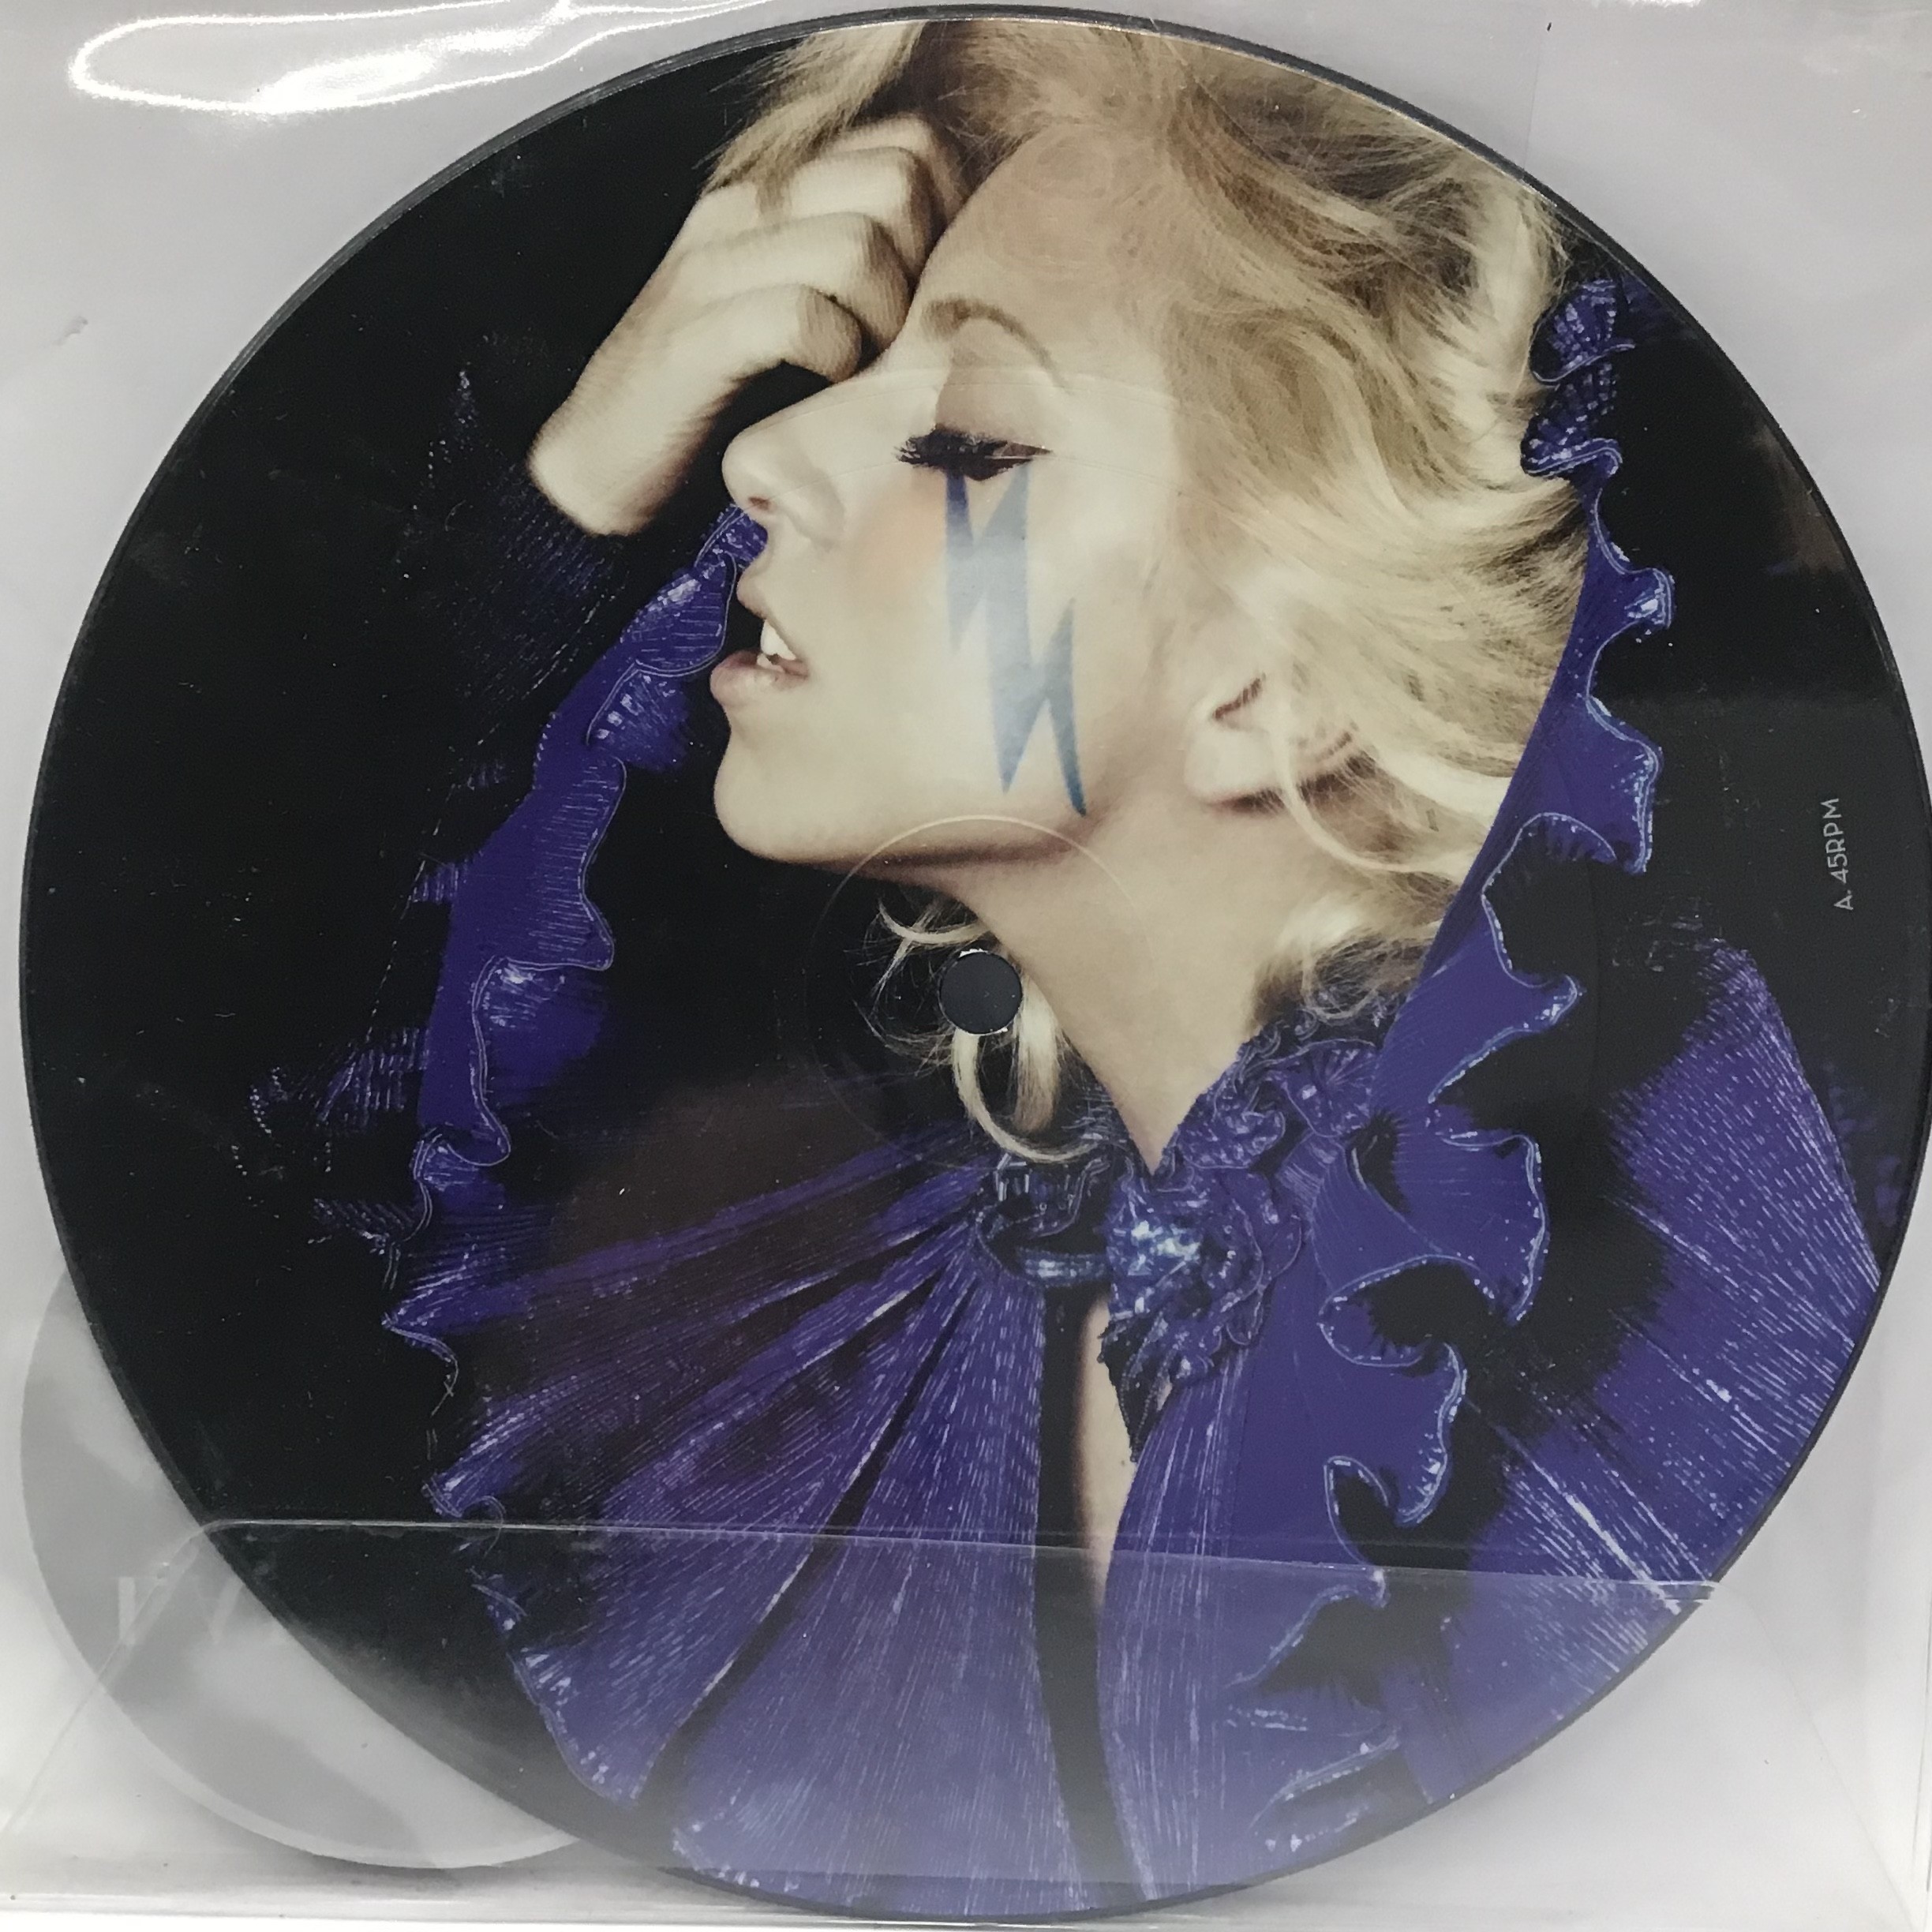 LADY GAGA ‘JUST DANCE’ 7” PICTURE DISC. This is a limited release of the 2008 2 track picture disc - Image 2 of 2